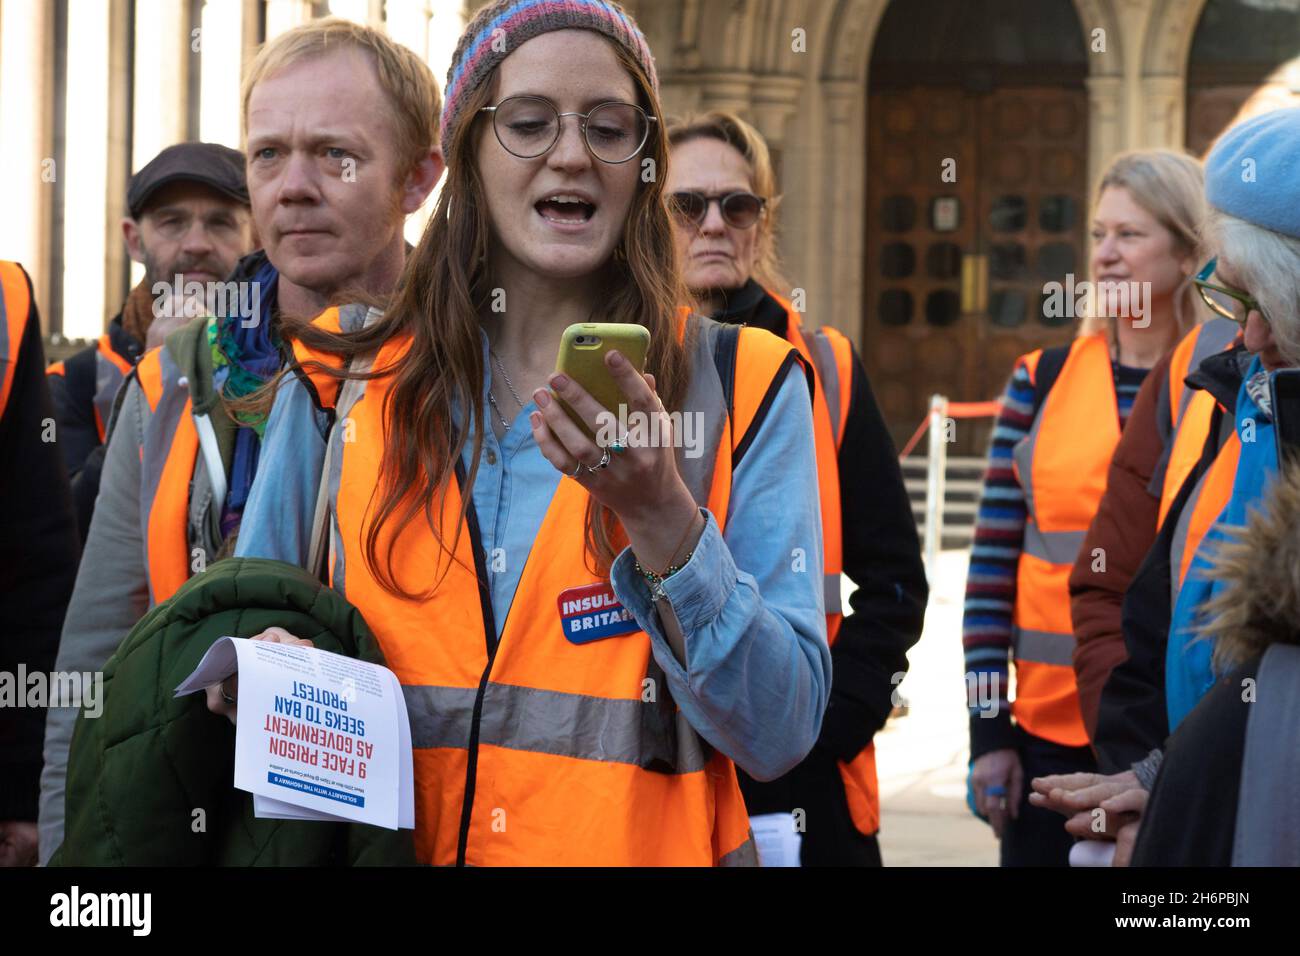 London, England, UK 17 November 2021 Climate Change activists from Insulate Britain leave the Royal Courts of Justice following the imprisonment of nine members of the group for allegedly breaking injunctions designed to restrict disruptive protest. Spokesperson for the group Tracey Mallaghan delivered a statement on behalf of the group. Stock Photo